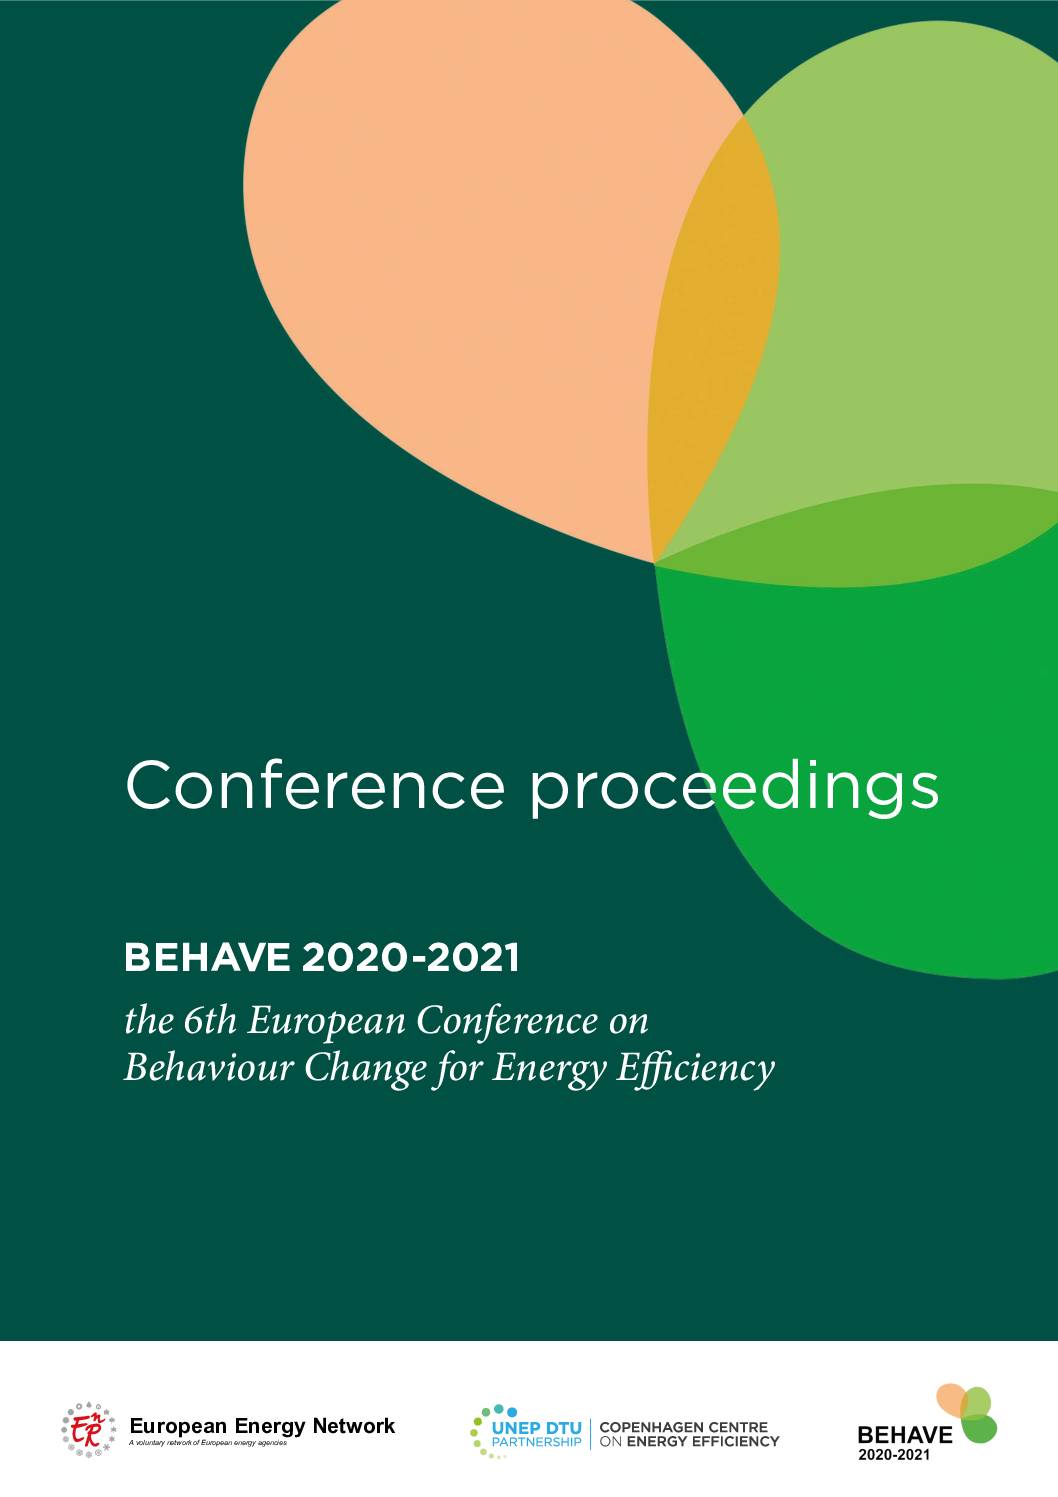 BEHAVE 2020-2021 Conference proceedings